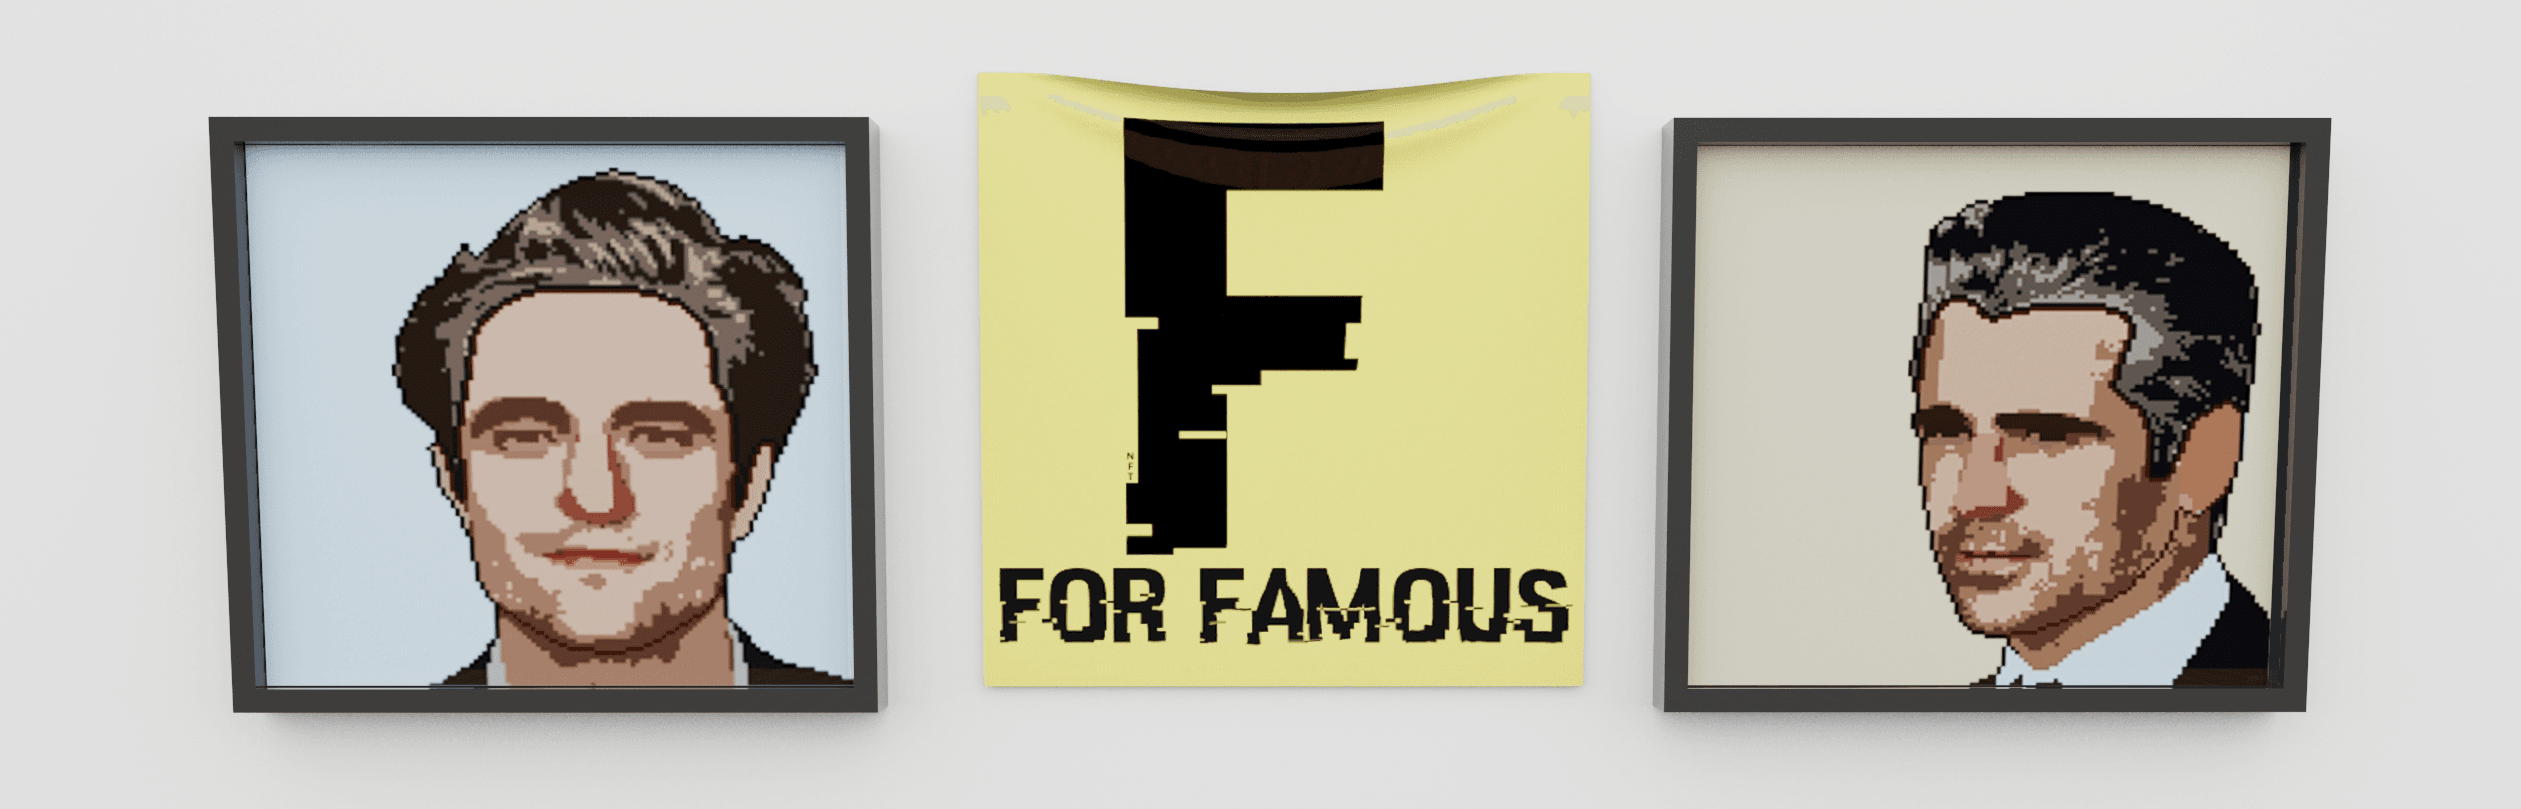 for_famous banner